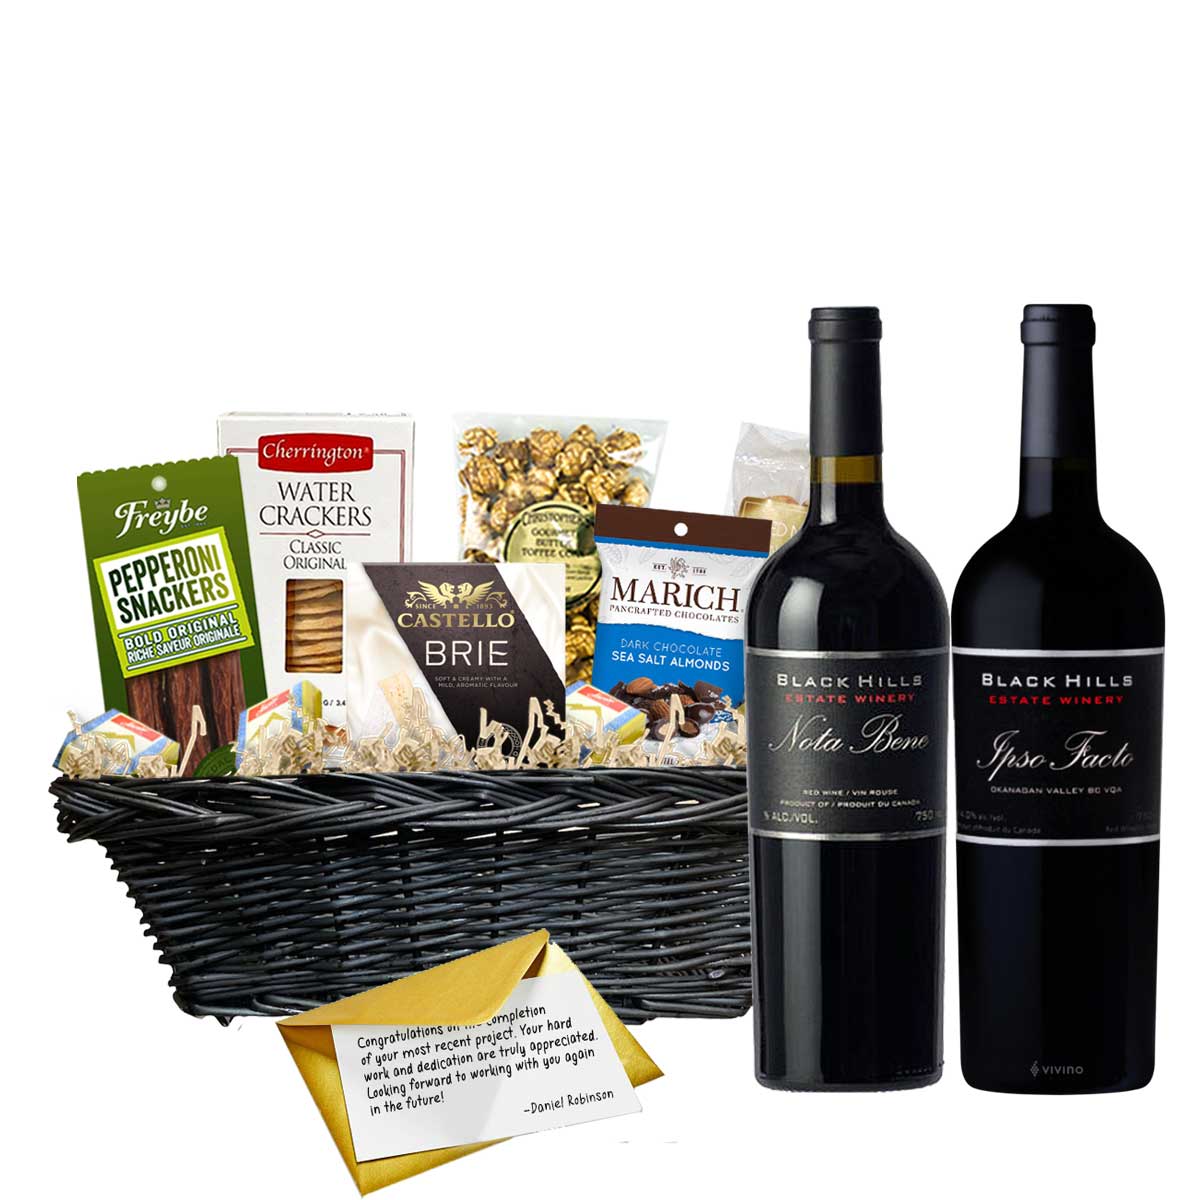 TAG Liquor Stores Canada Delivery-Black Hills Nota Bene and Ipso Facto 2 x 750ml Corporate Gift Basket-wine-tagliquorstores.com